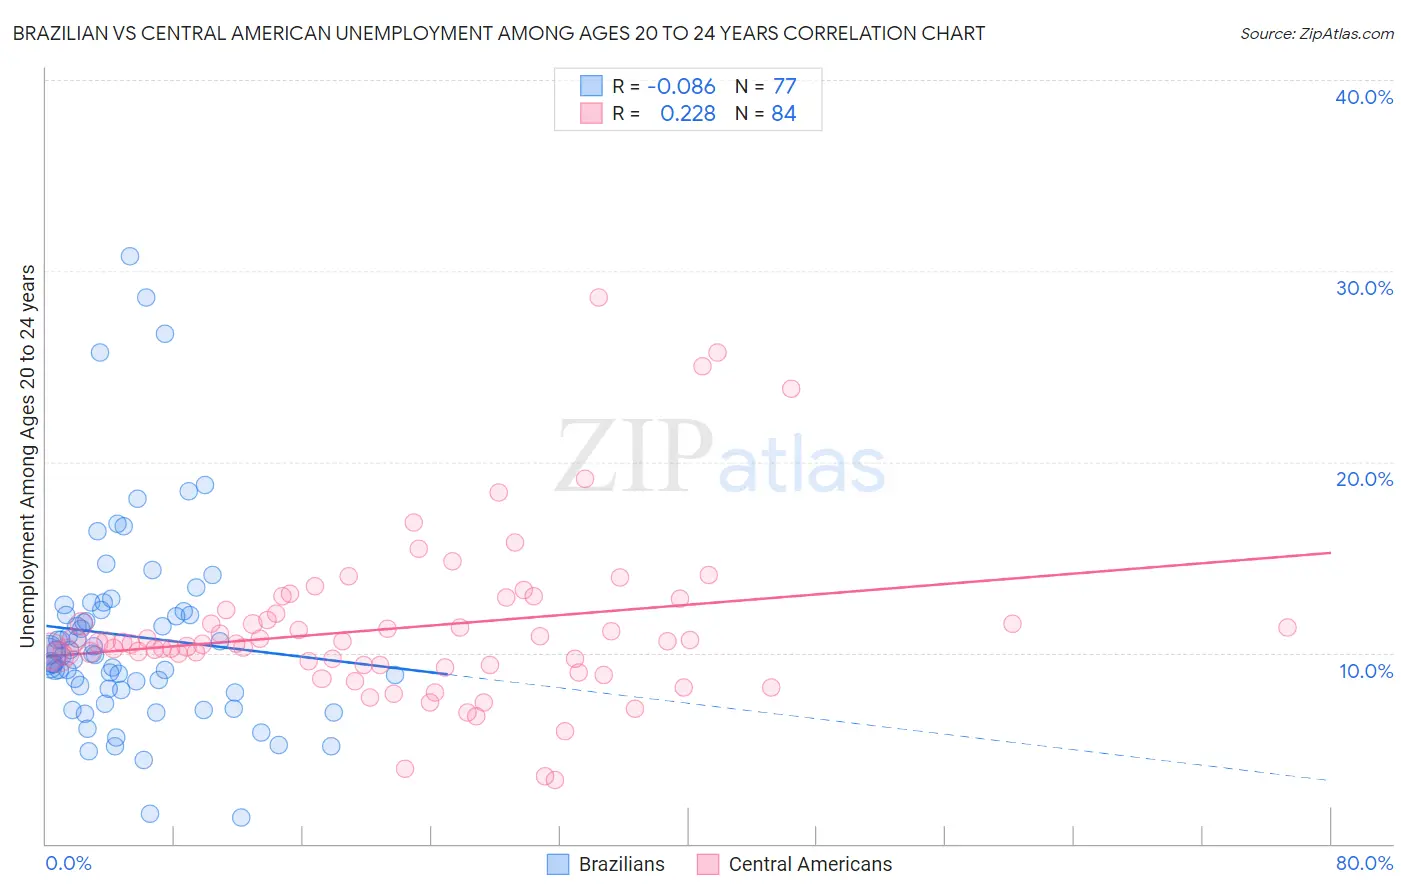 Brazilian vs Central American Unemployment Among Ages 20 to 24 years